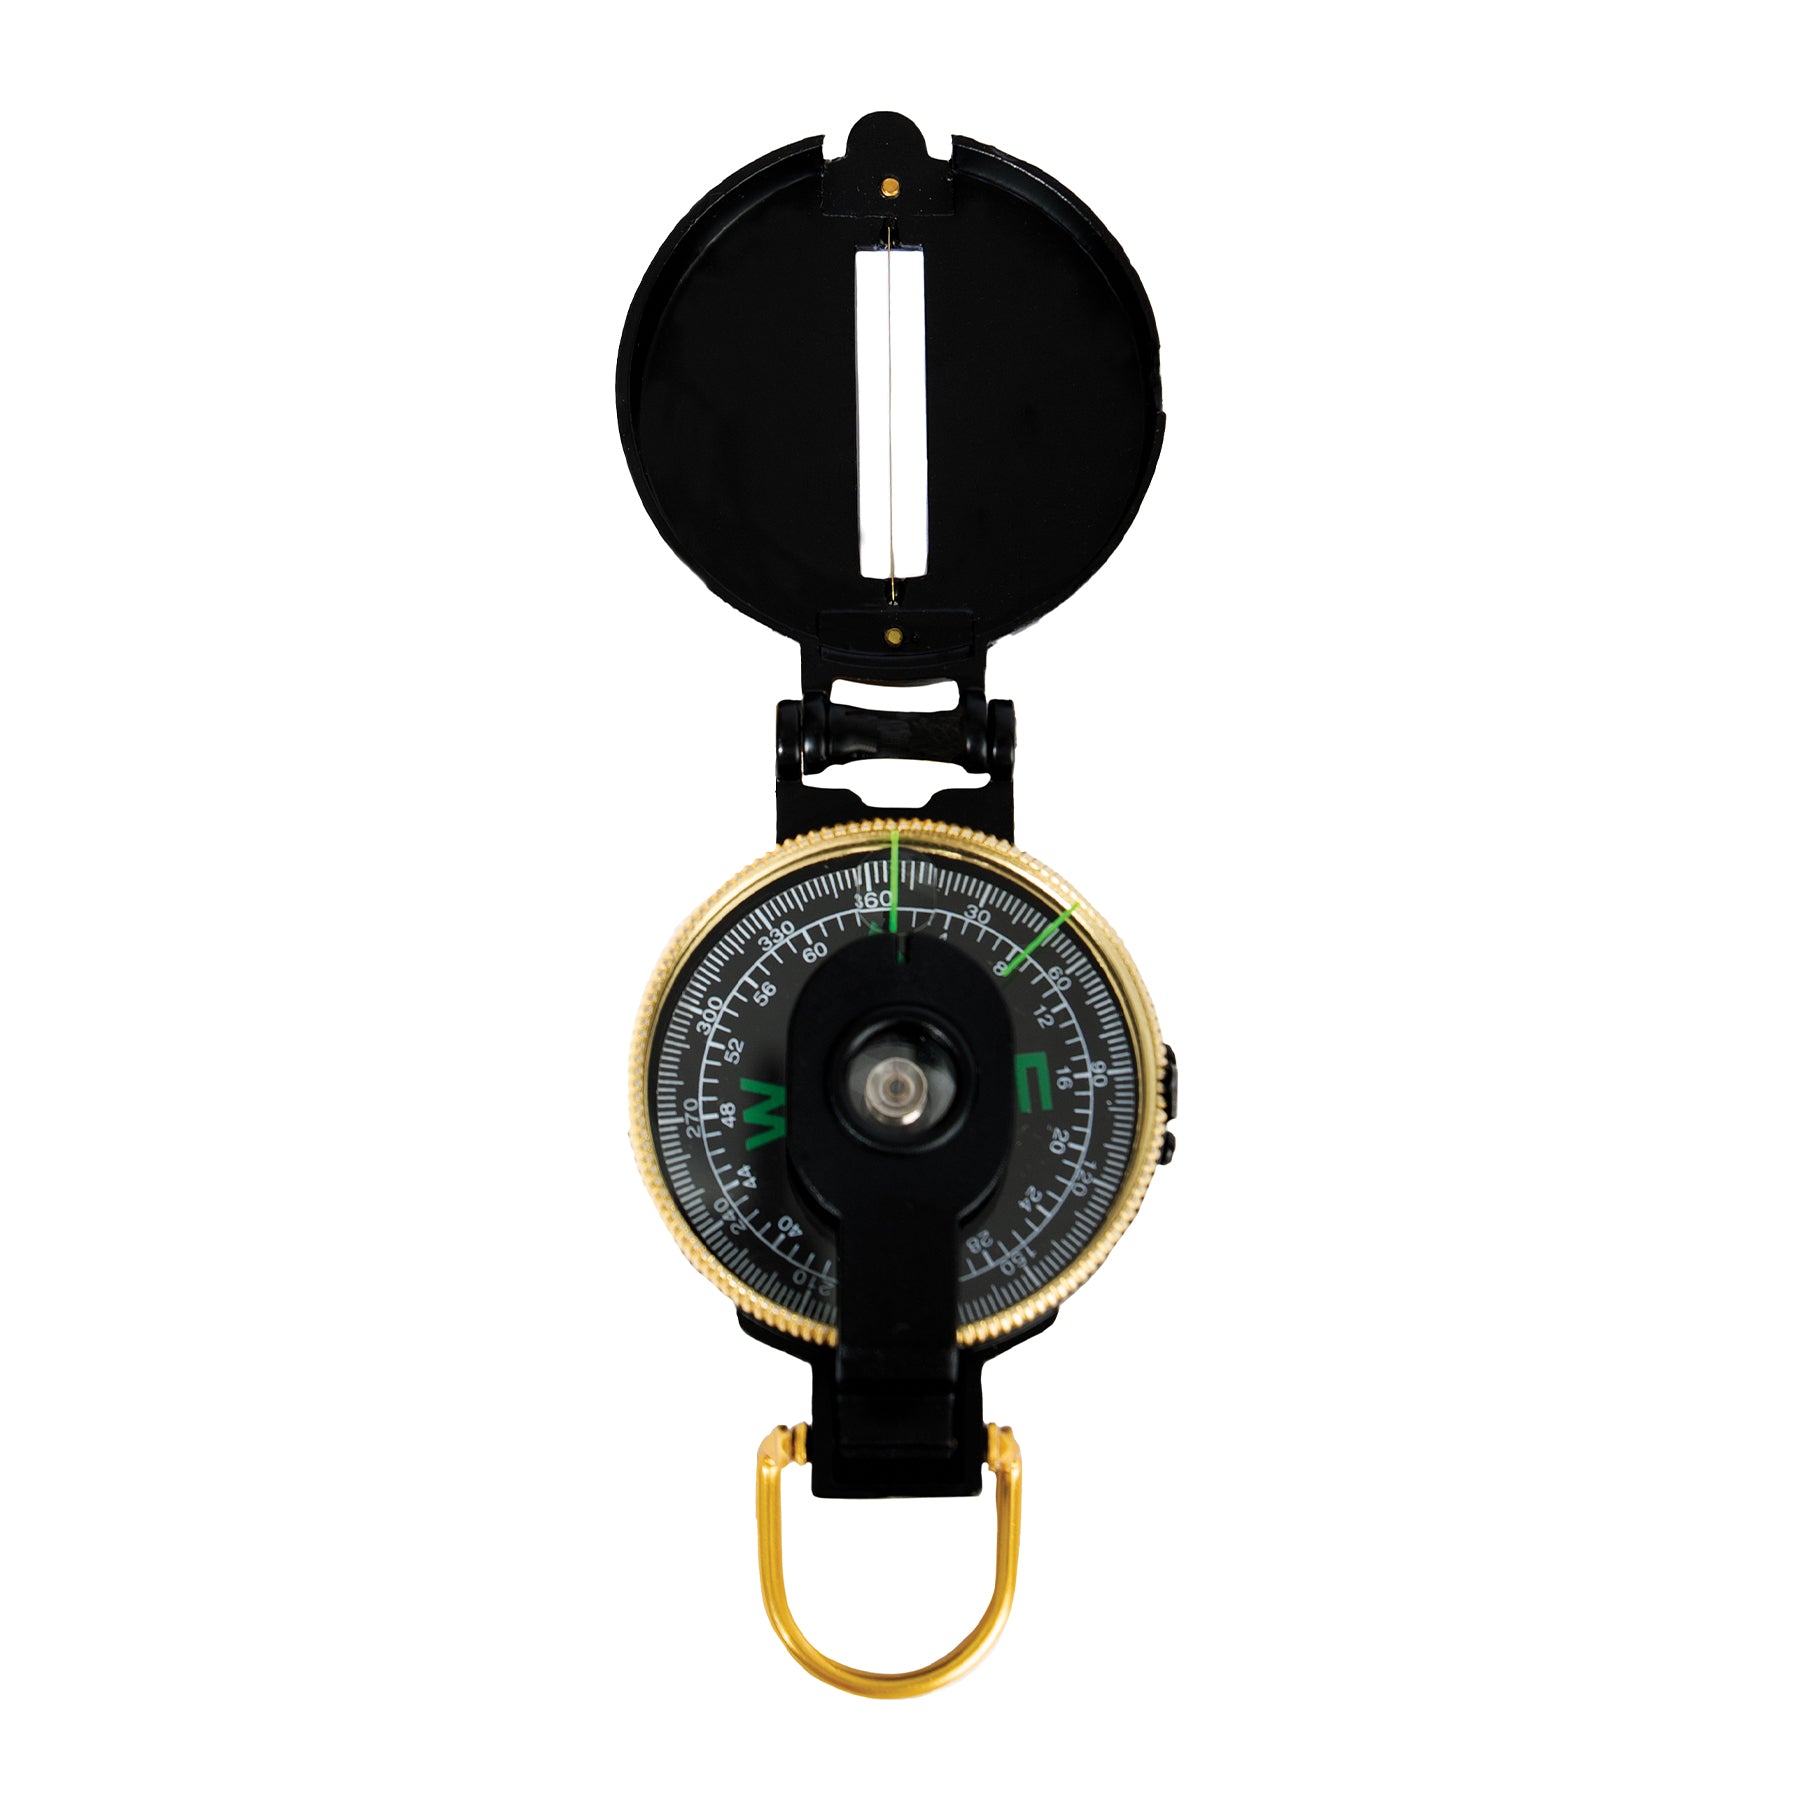 Rothco Carabiner Compass Thermometer